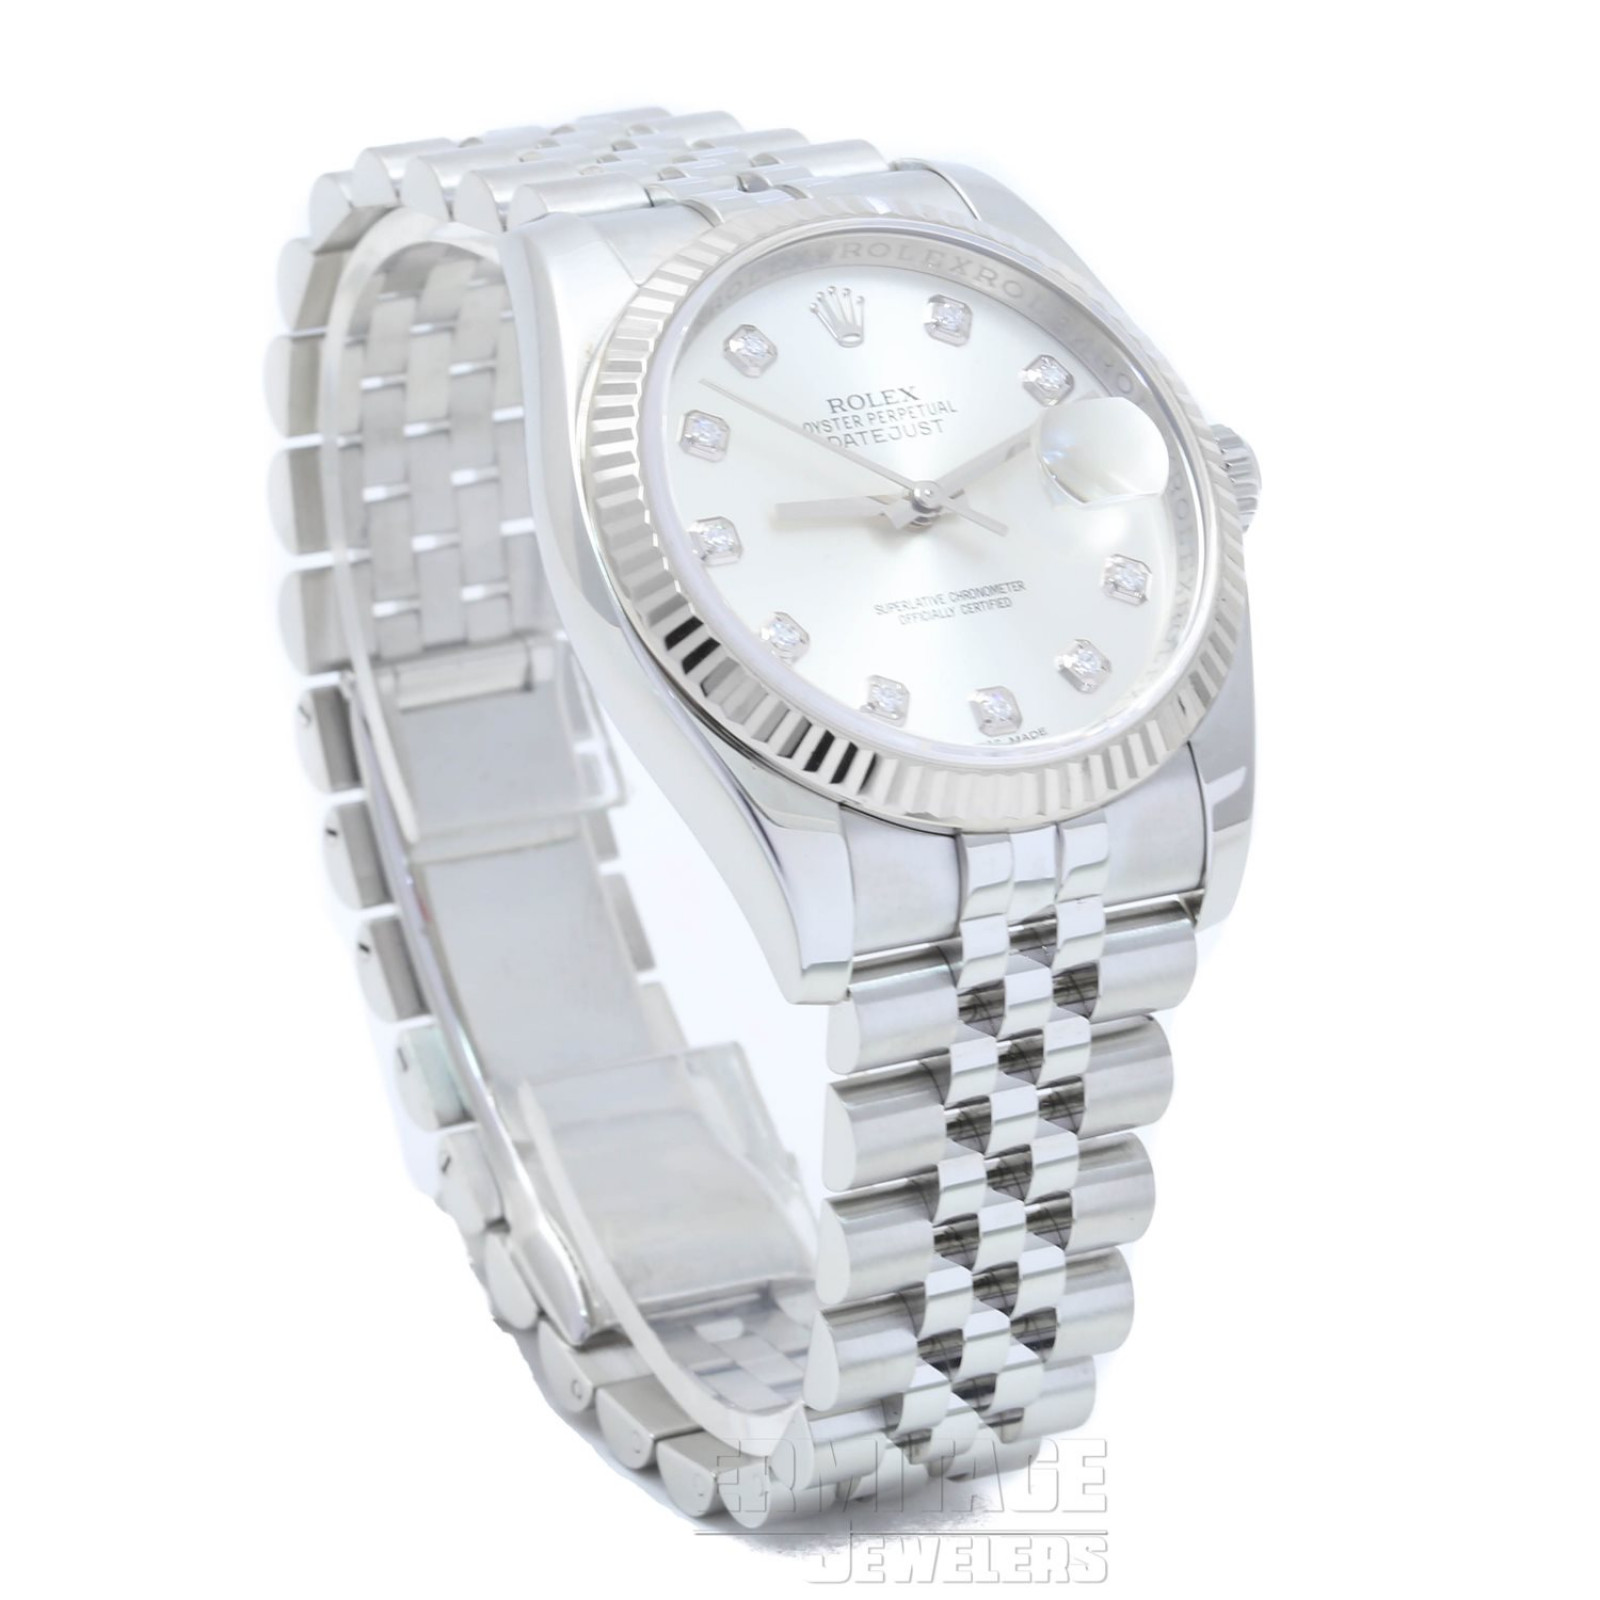 White Gold Fluted Rolex Datejust 116234